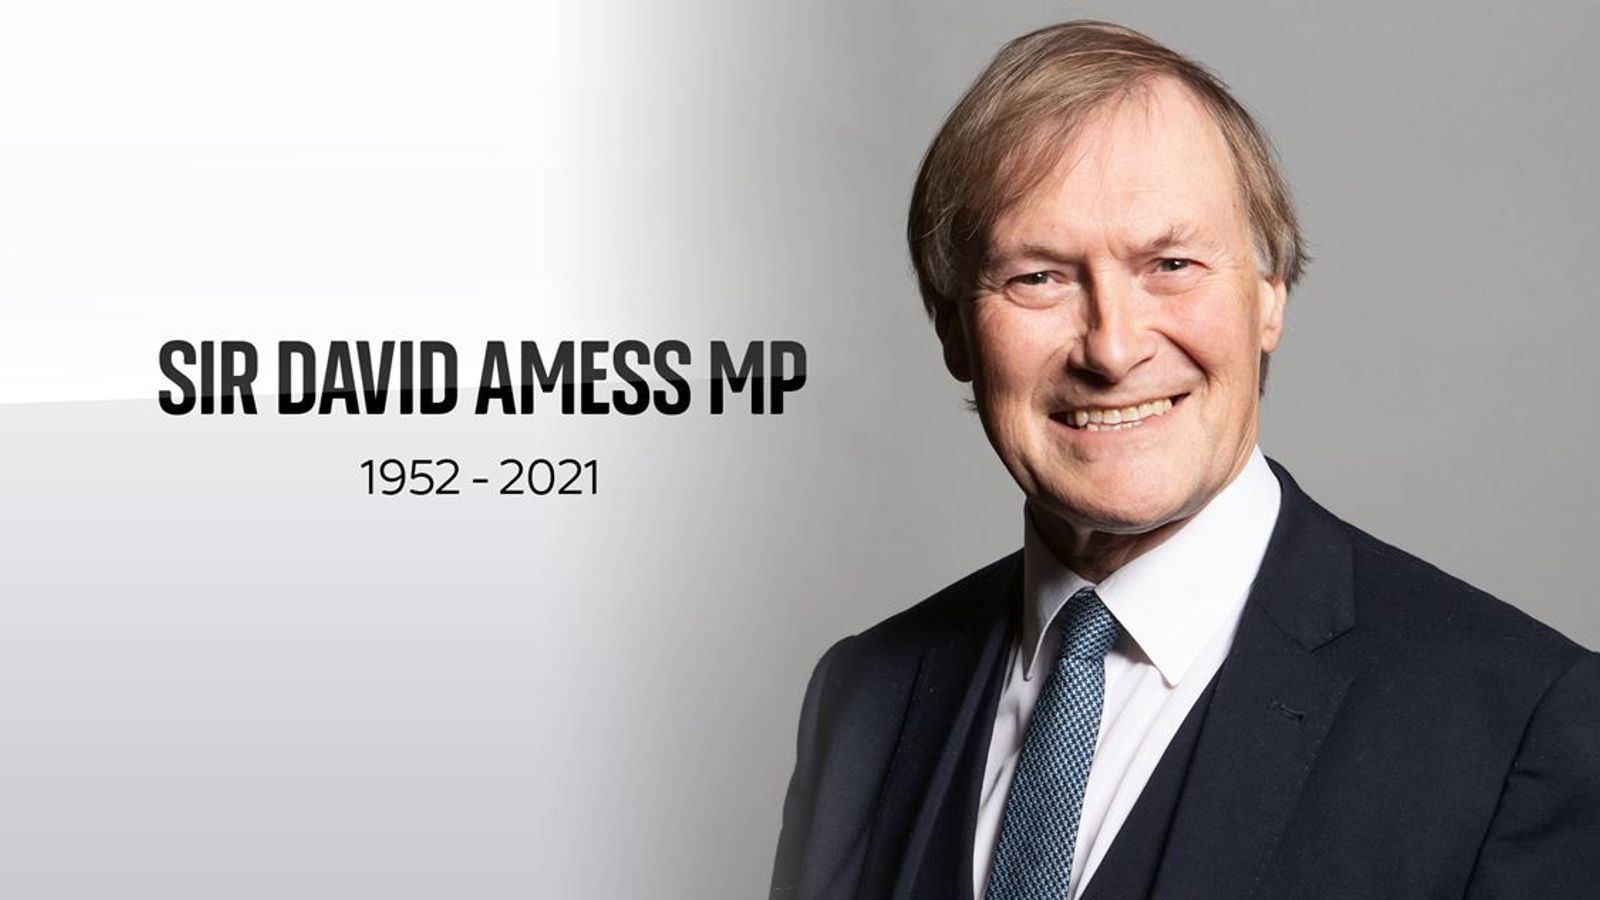 Statement by Premier Fahie on death of Sir David Amess MP